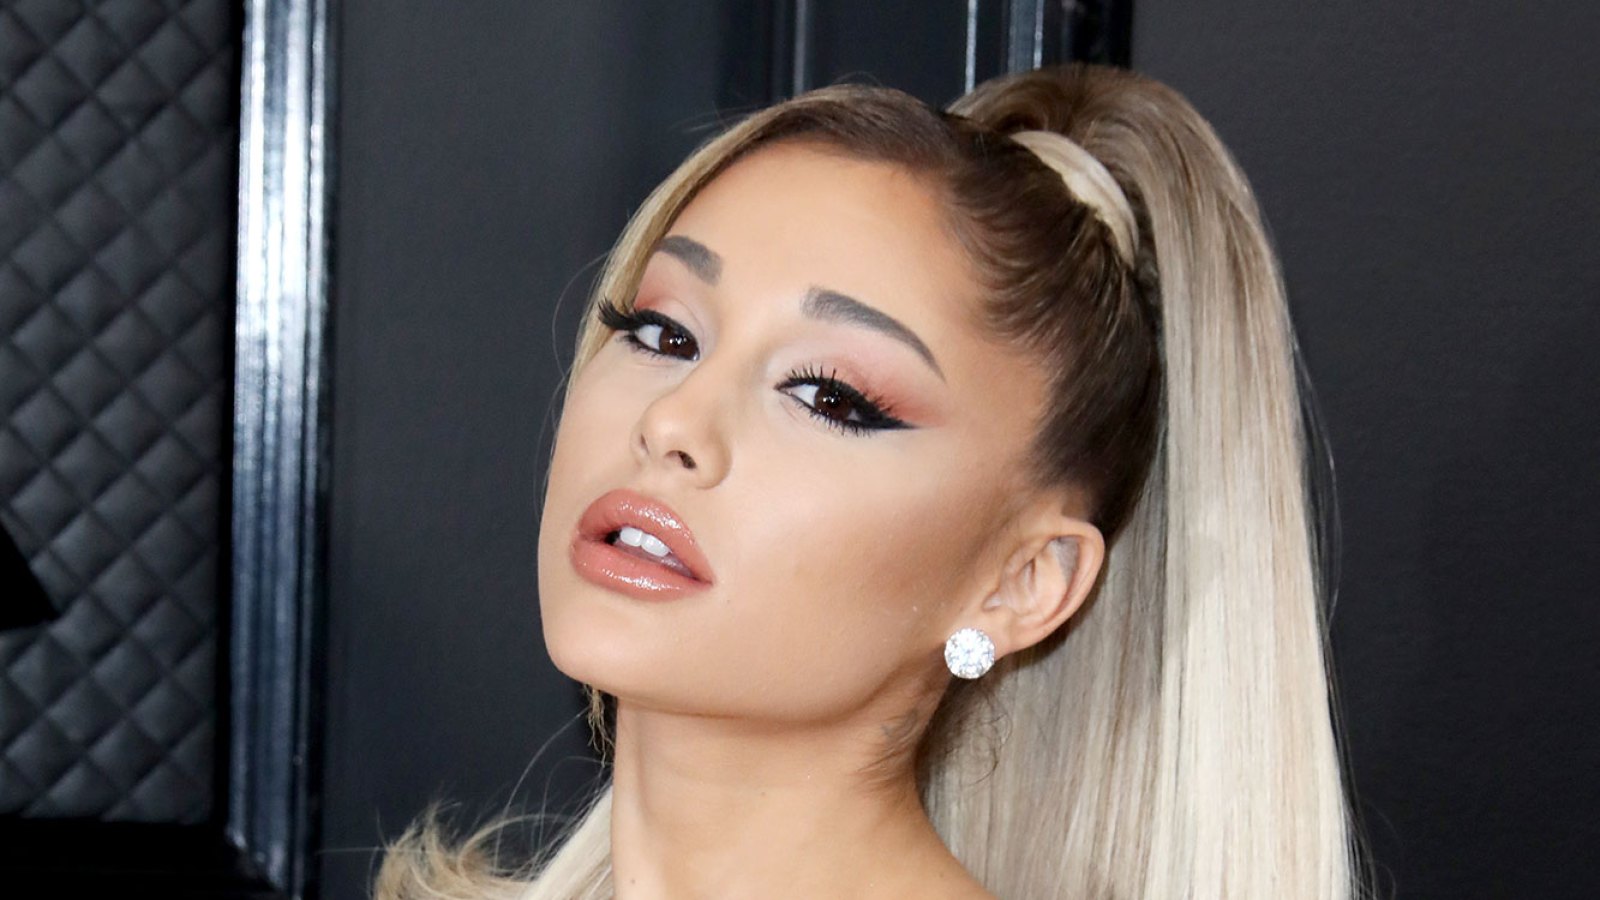 Ariana Grande Beauty Line Could Be Just Around Corner